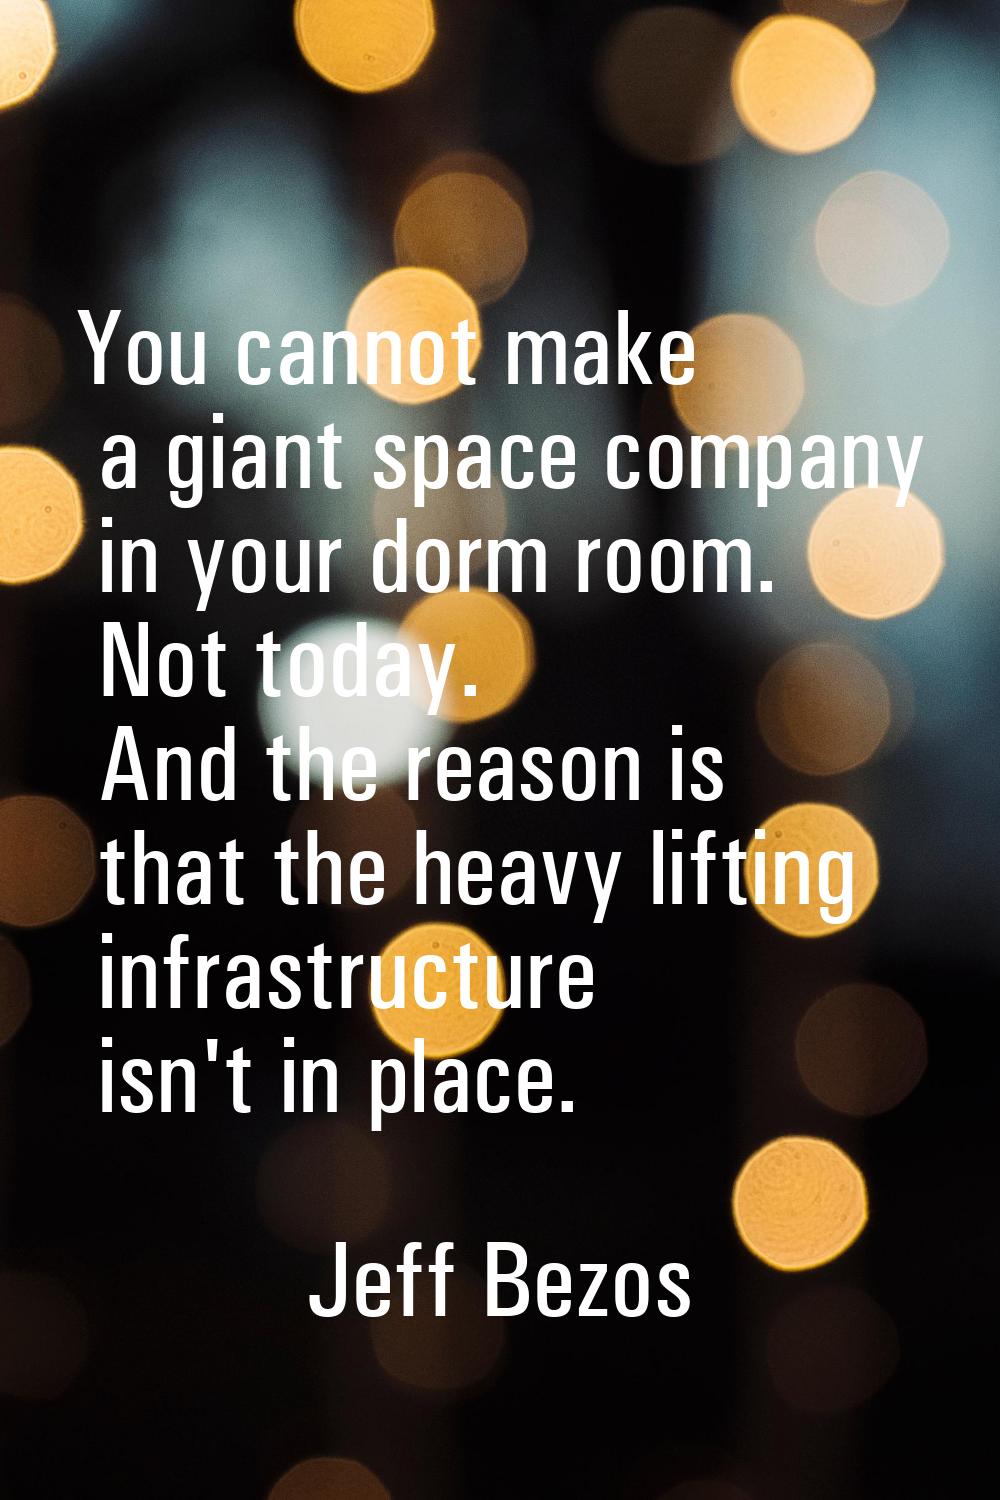 You cannot make a giant space company in your dorm room. Not today. And the reason is that the heav